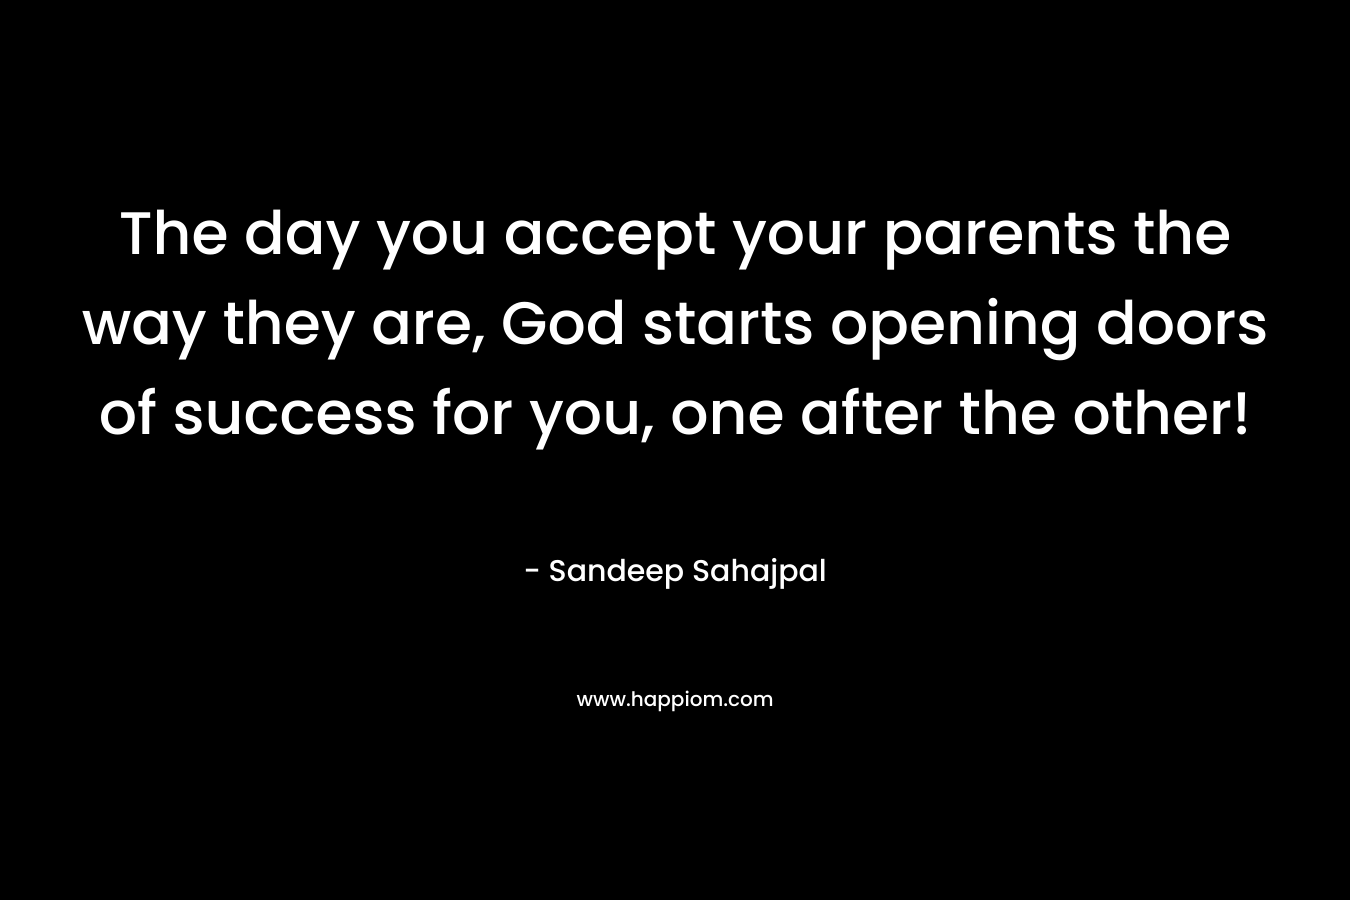 The day you accept your parents the way they are, God starts opening doors of success for you, one after the other! – Sandeep Sahajpal